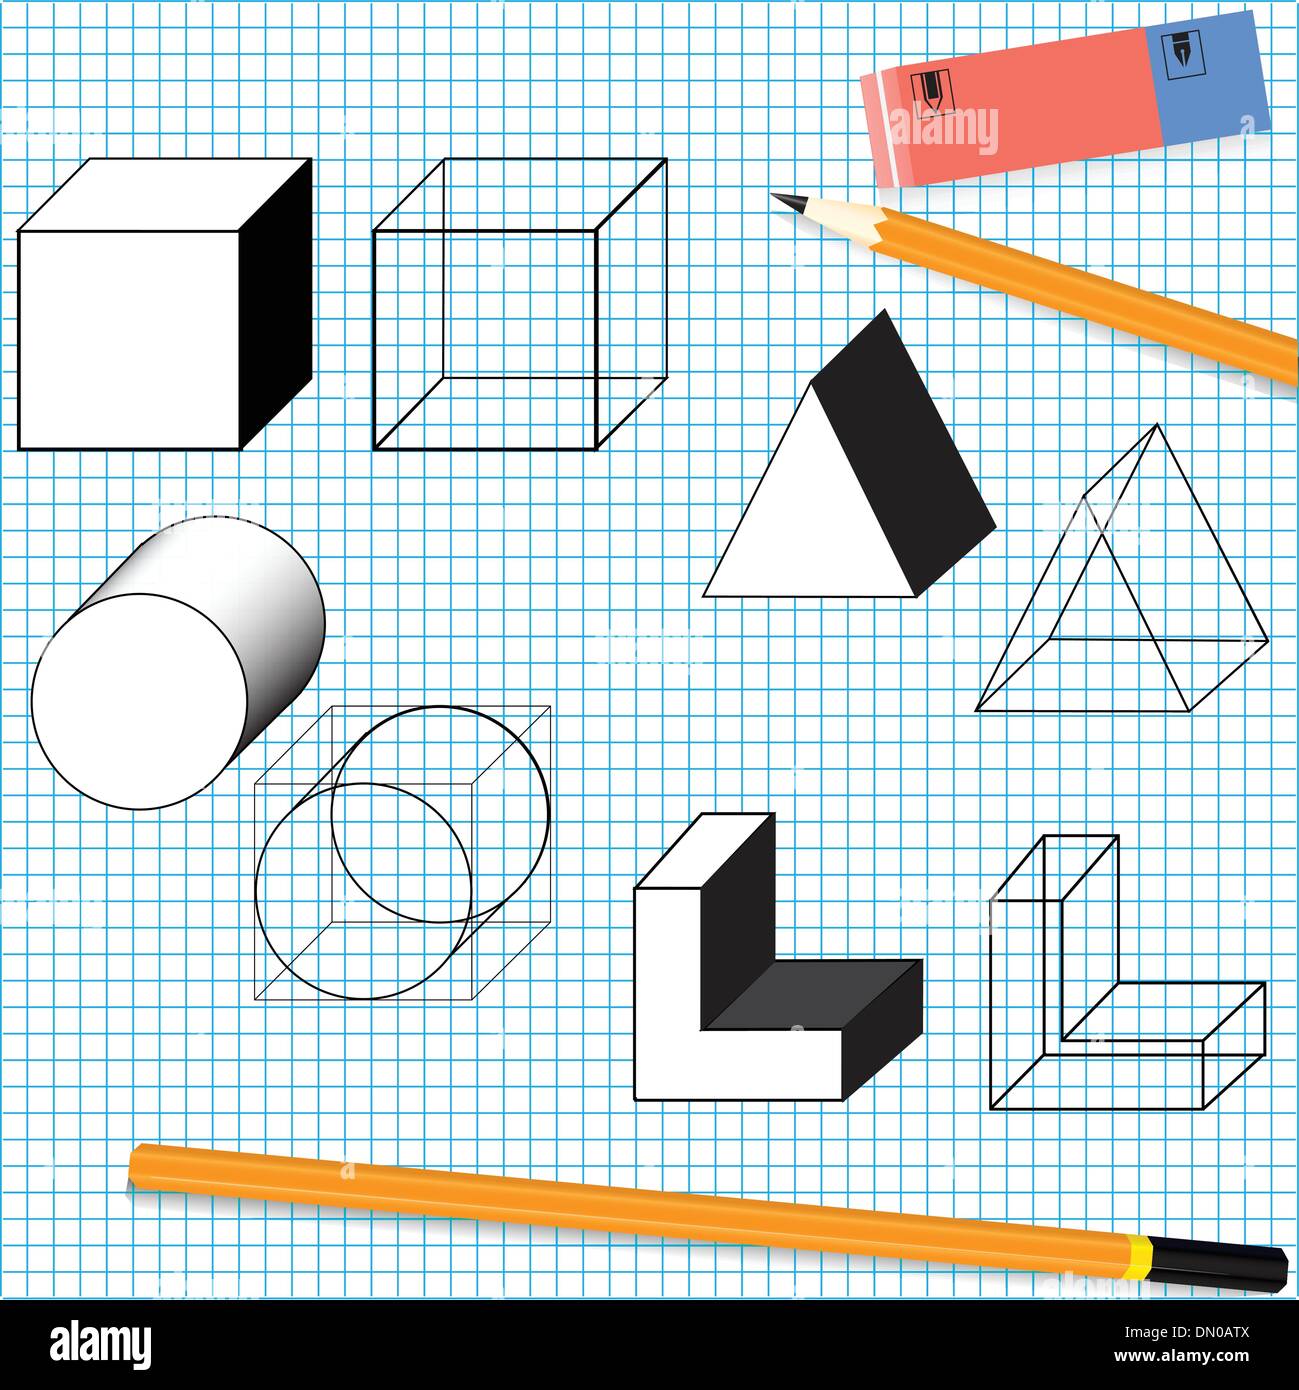 Simple drawing objects Stock Vector